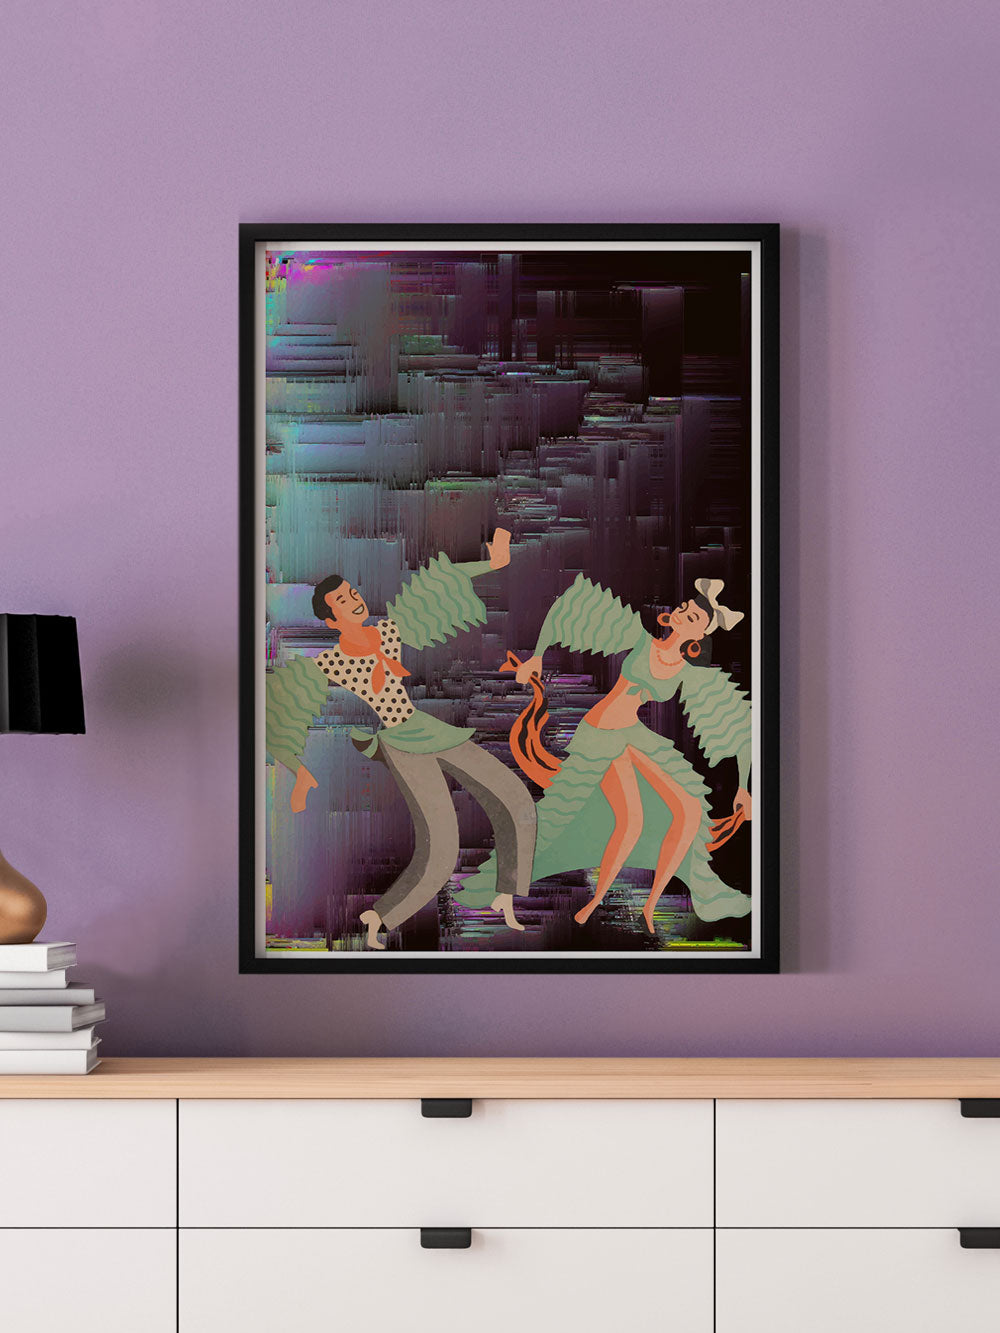 Space Rumba Retro Art Print in a frame on a wall